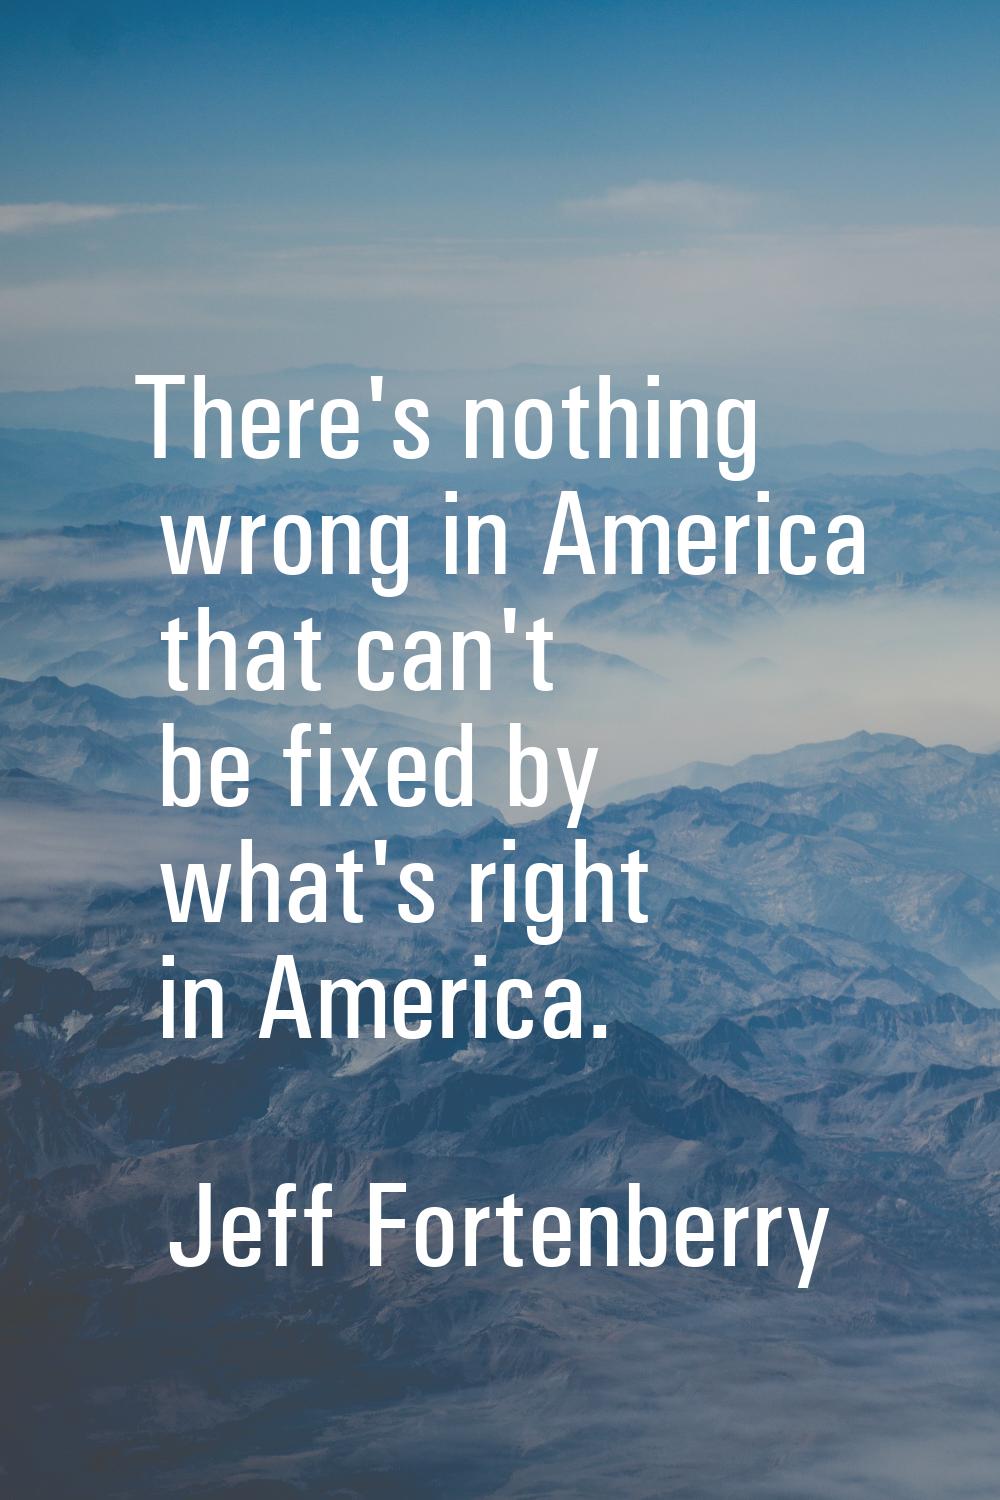 There's nothing wrong in America that can't be fixed by what's right in America.